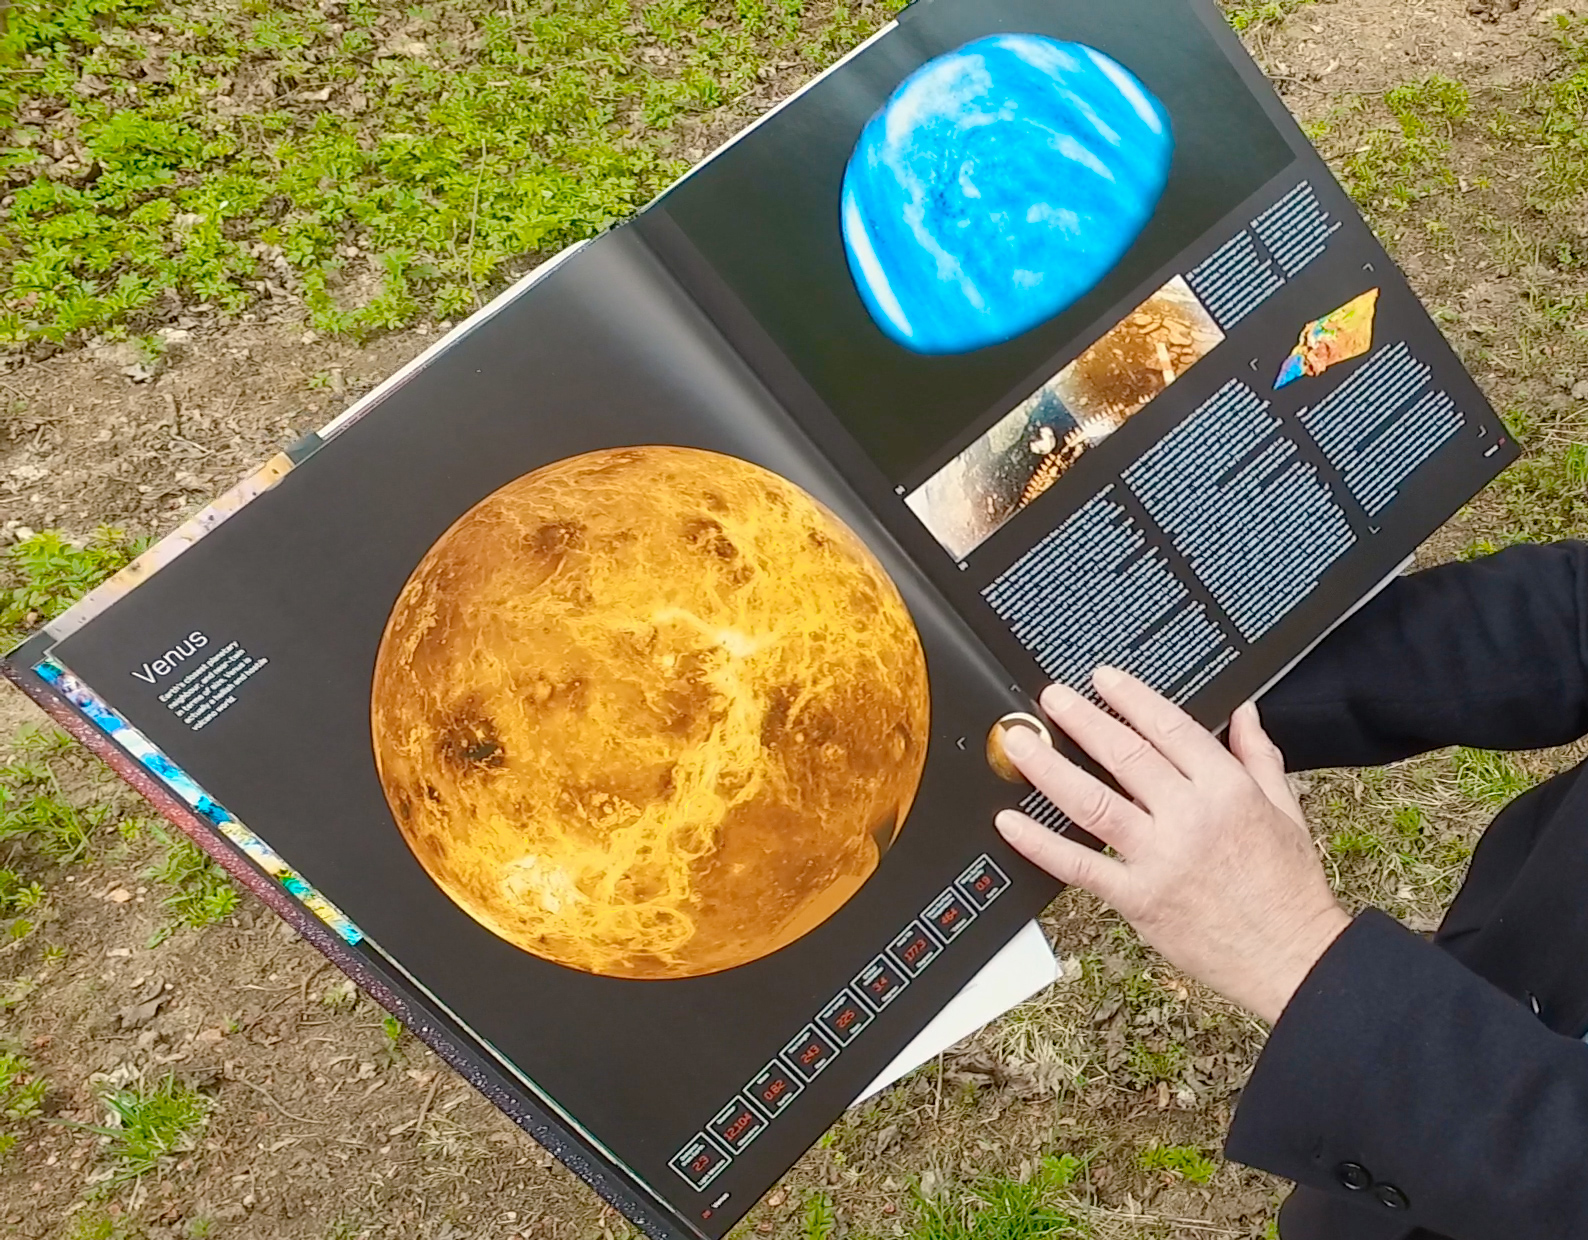 Amazing solar system and space book - My, The science, Astronomy, Space, solar system, Venus, Video, Longpost